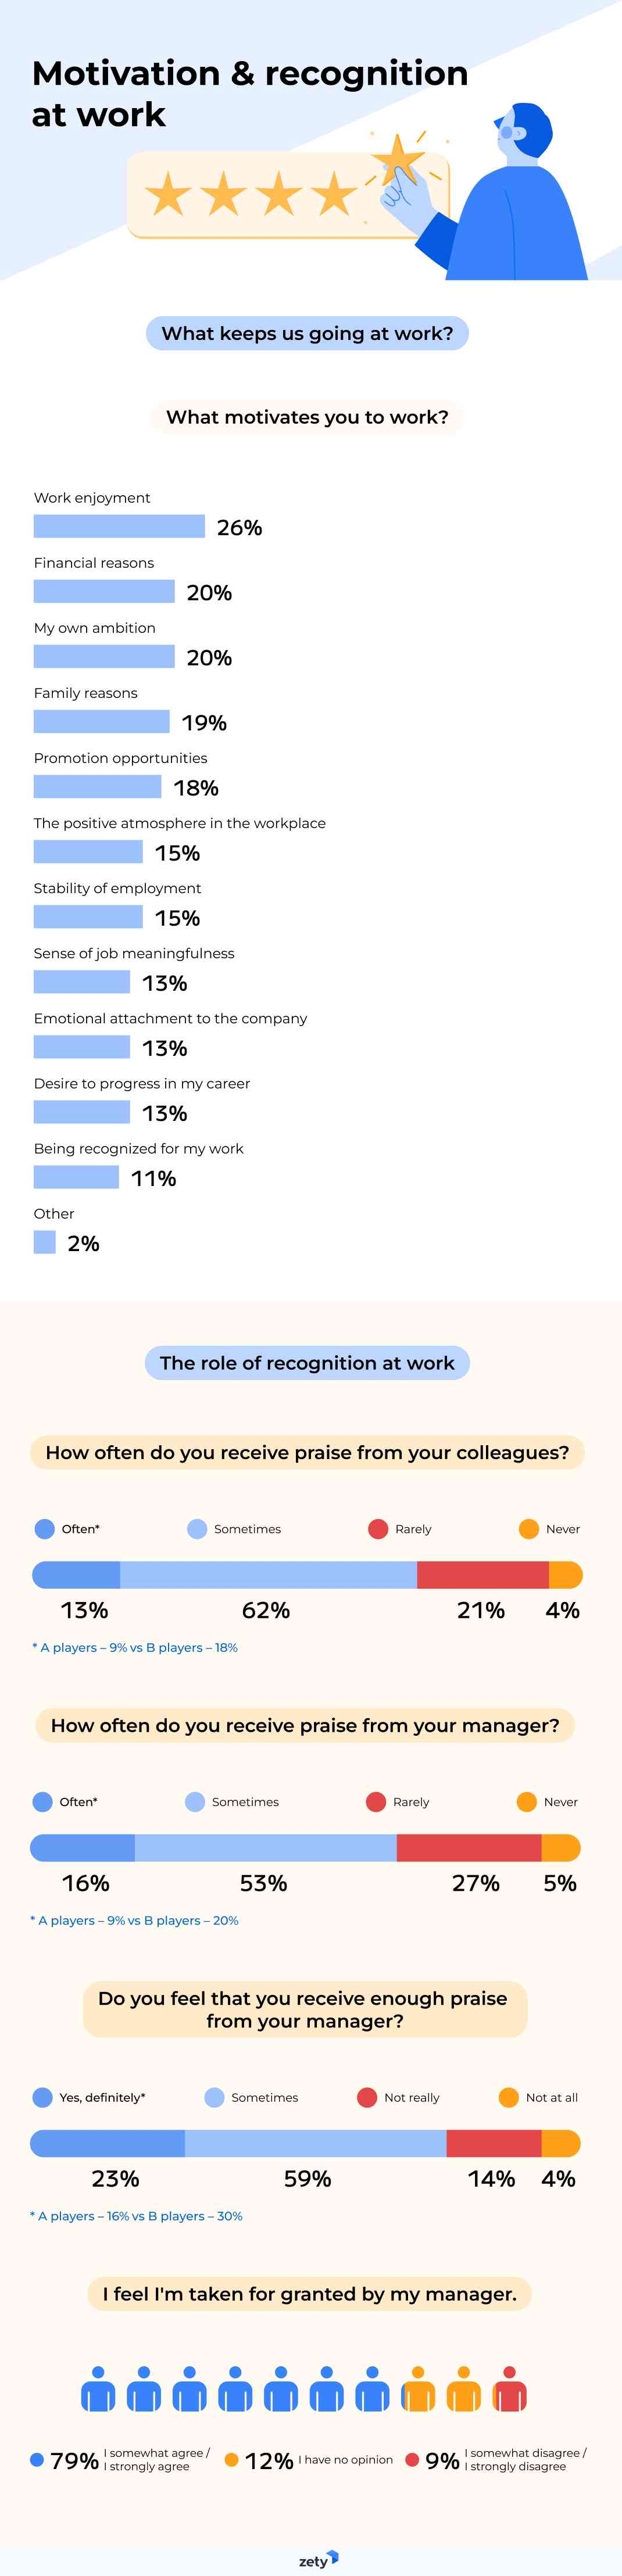 The role of motivation and recognition at work